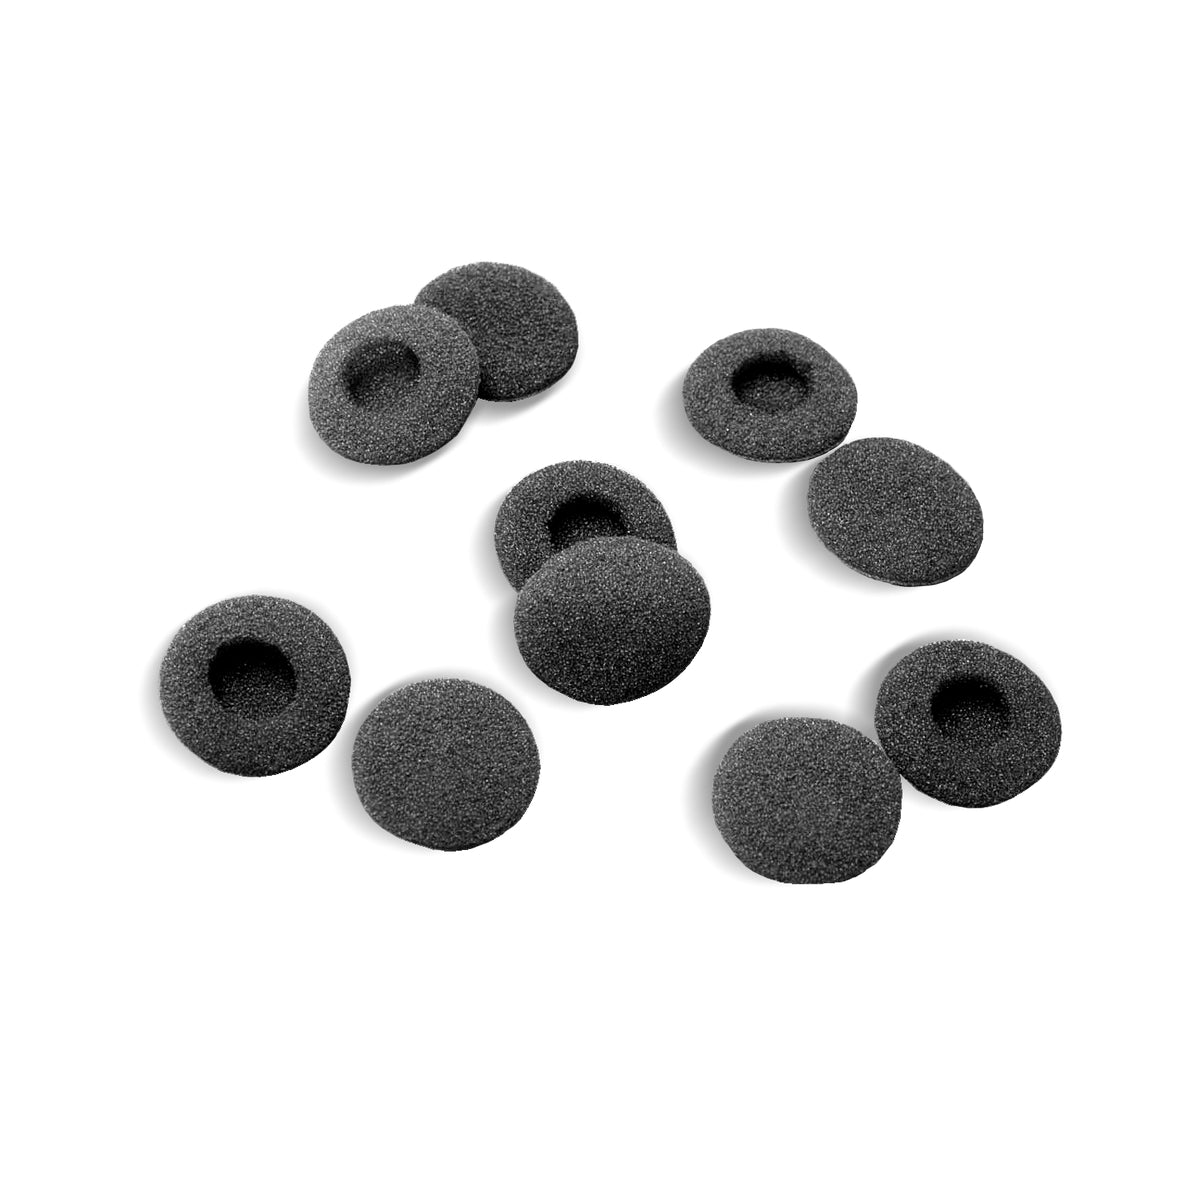 Williams Sound EAR 015-10 | EAR 013 Earbud Replacement Pads 10 Pack